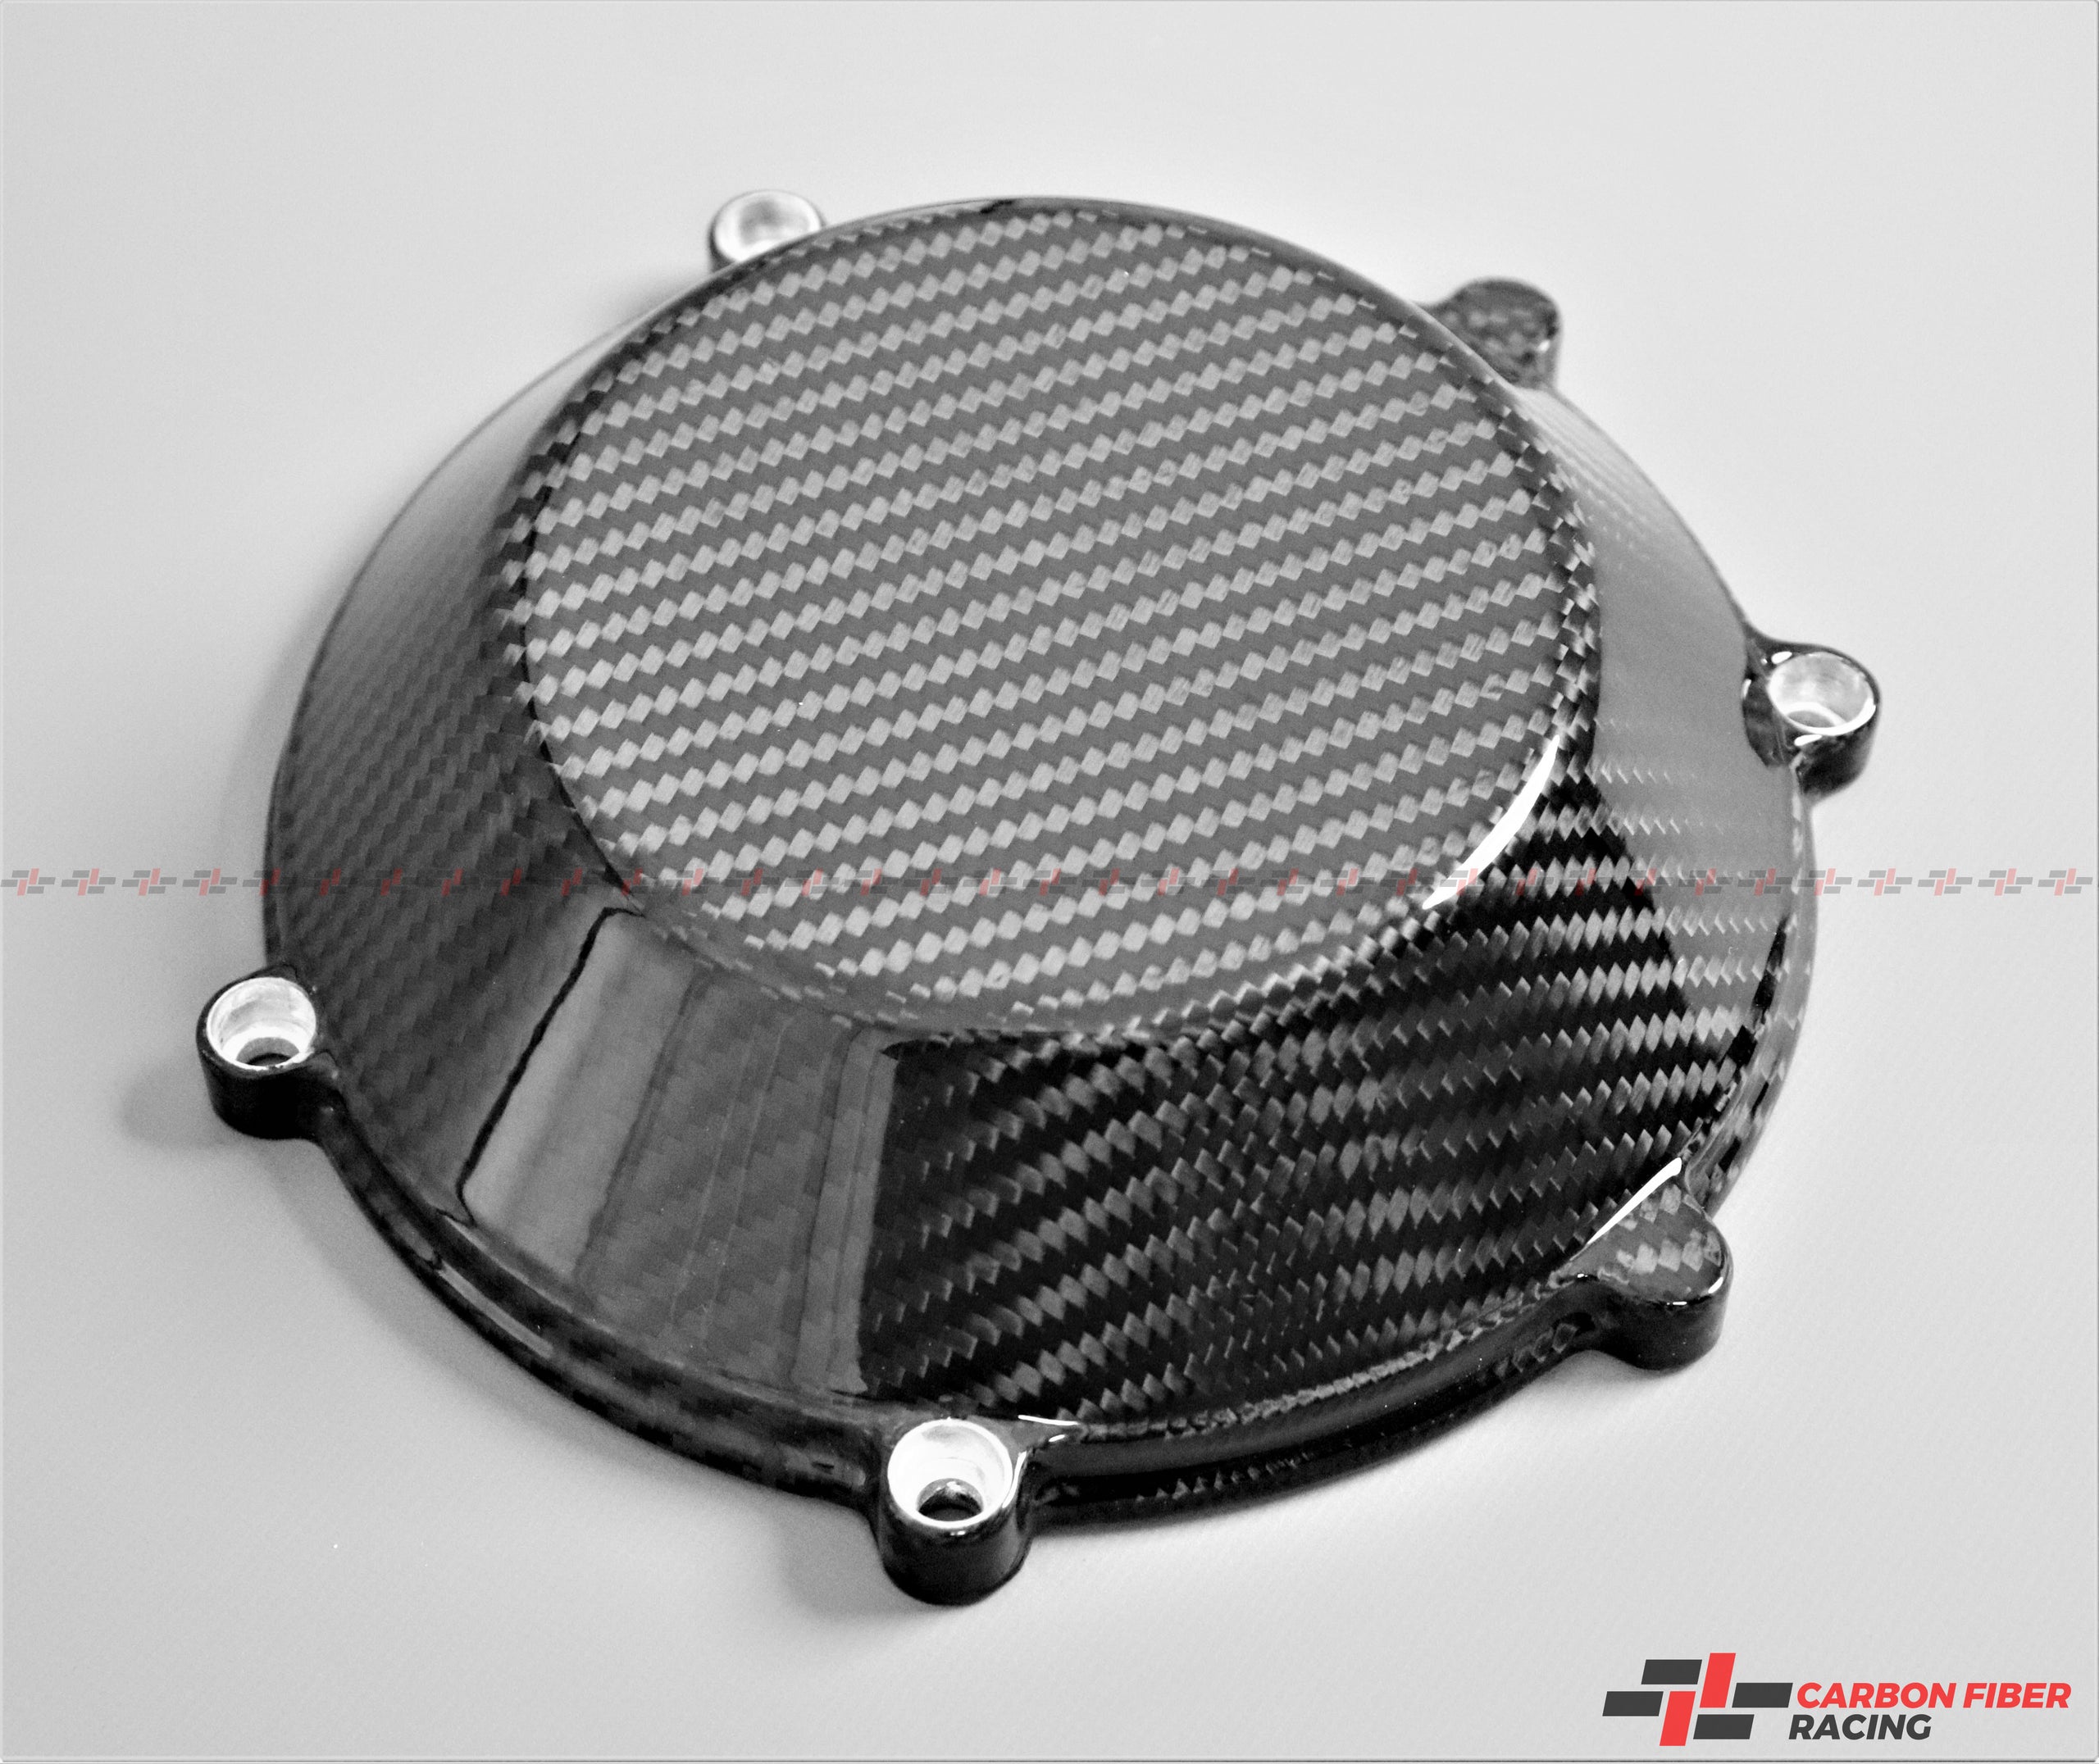 Ducati (Air Cooled 4V Engine) Dry Clutch Cover with Aluminum Inserts